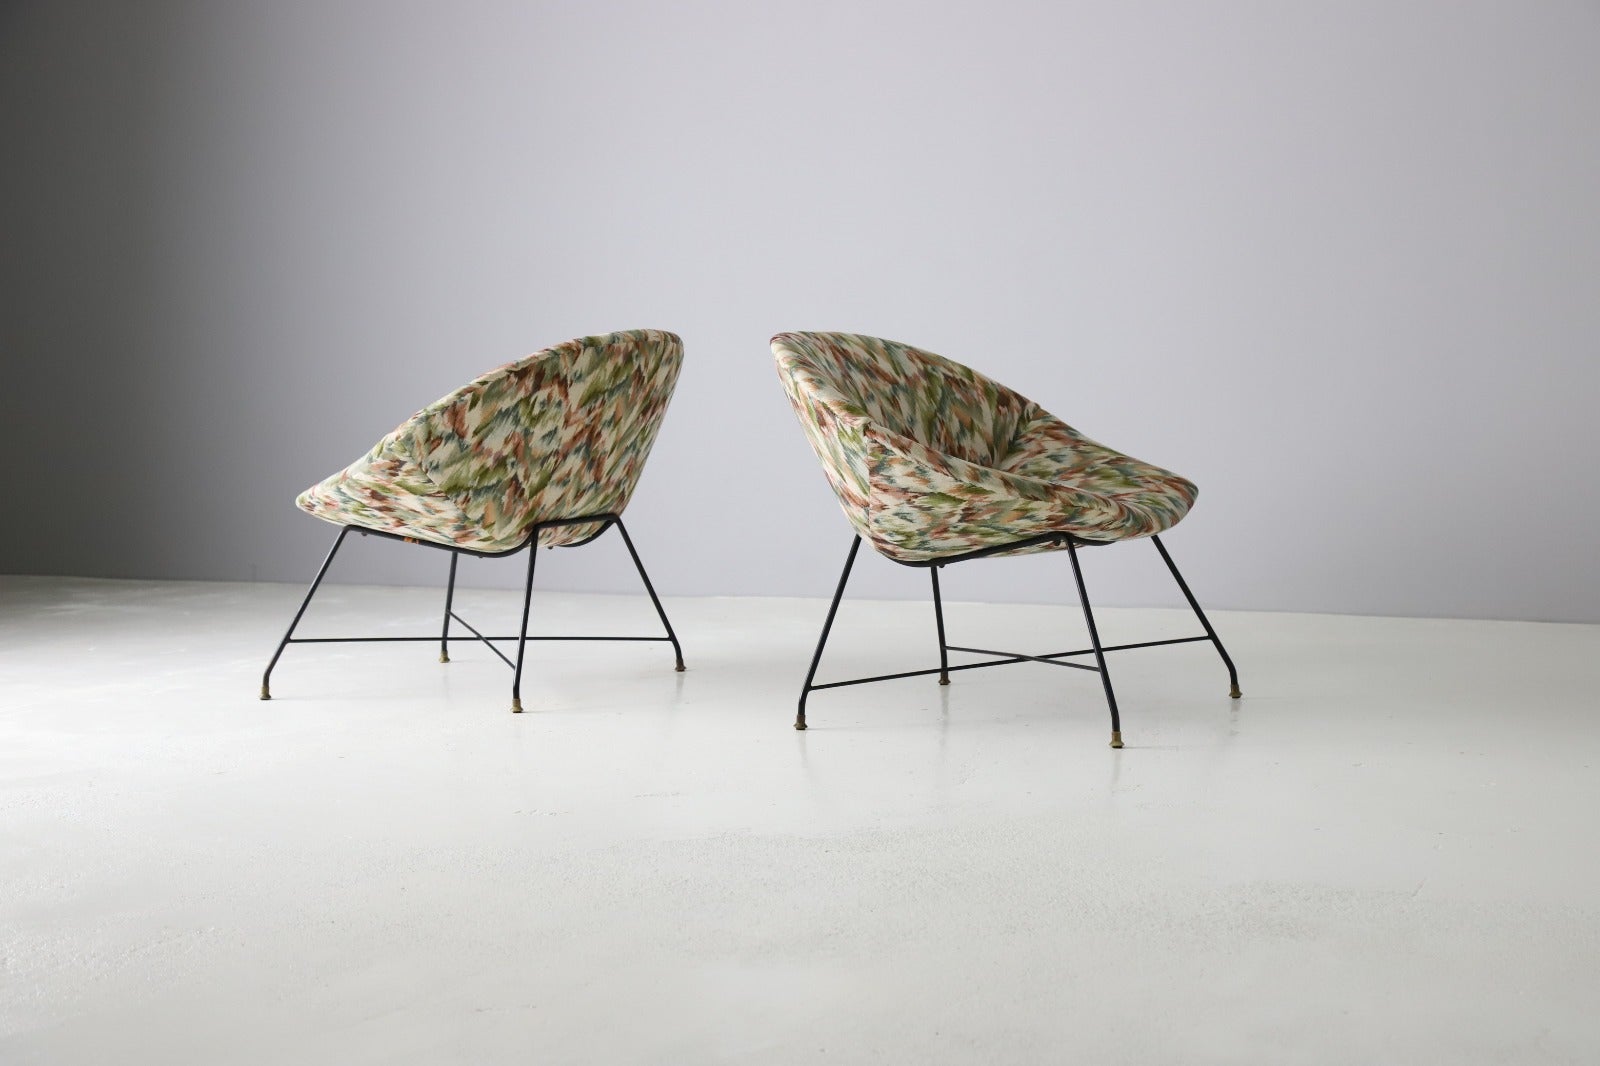 Elegant pair of 'Minoletta' lounge chairs from Italy. Designed by Augusto Bozzi and produced by Fratelli Saporiti in 1957. Original fabric seat on a lacquered metal base with brass feet. Both chairs are labeled by the maker.